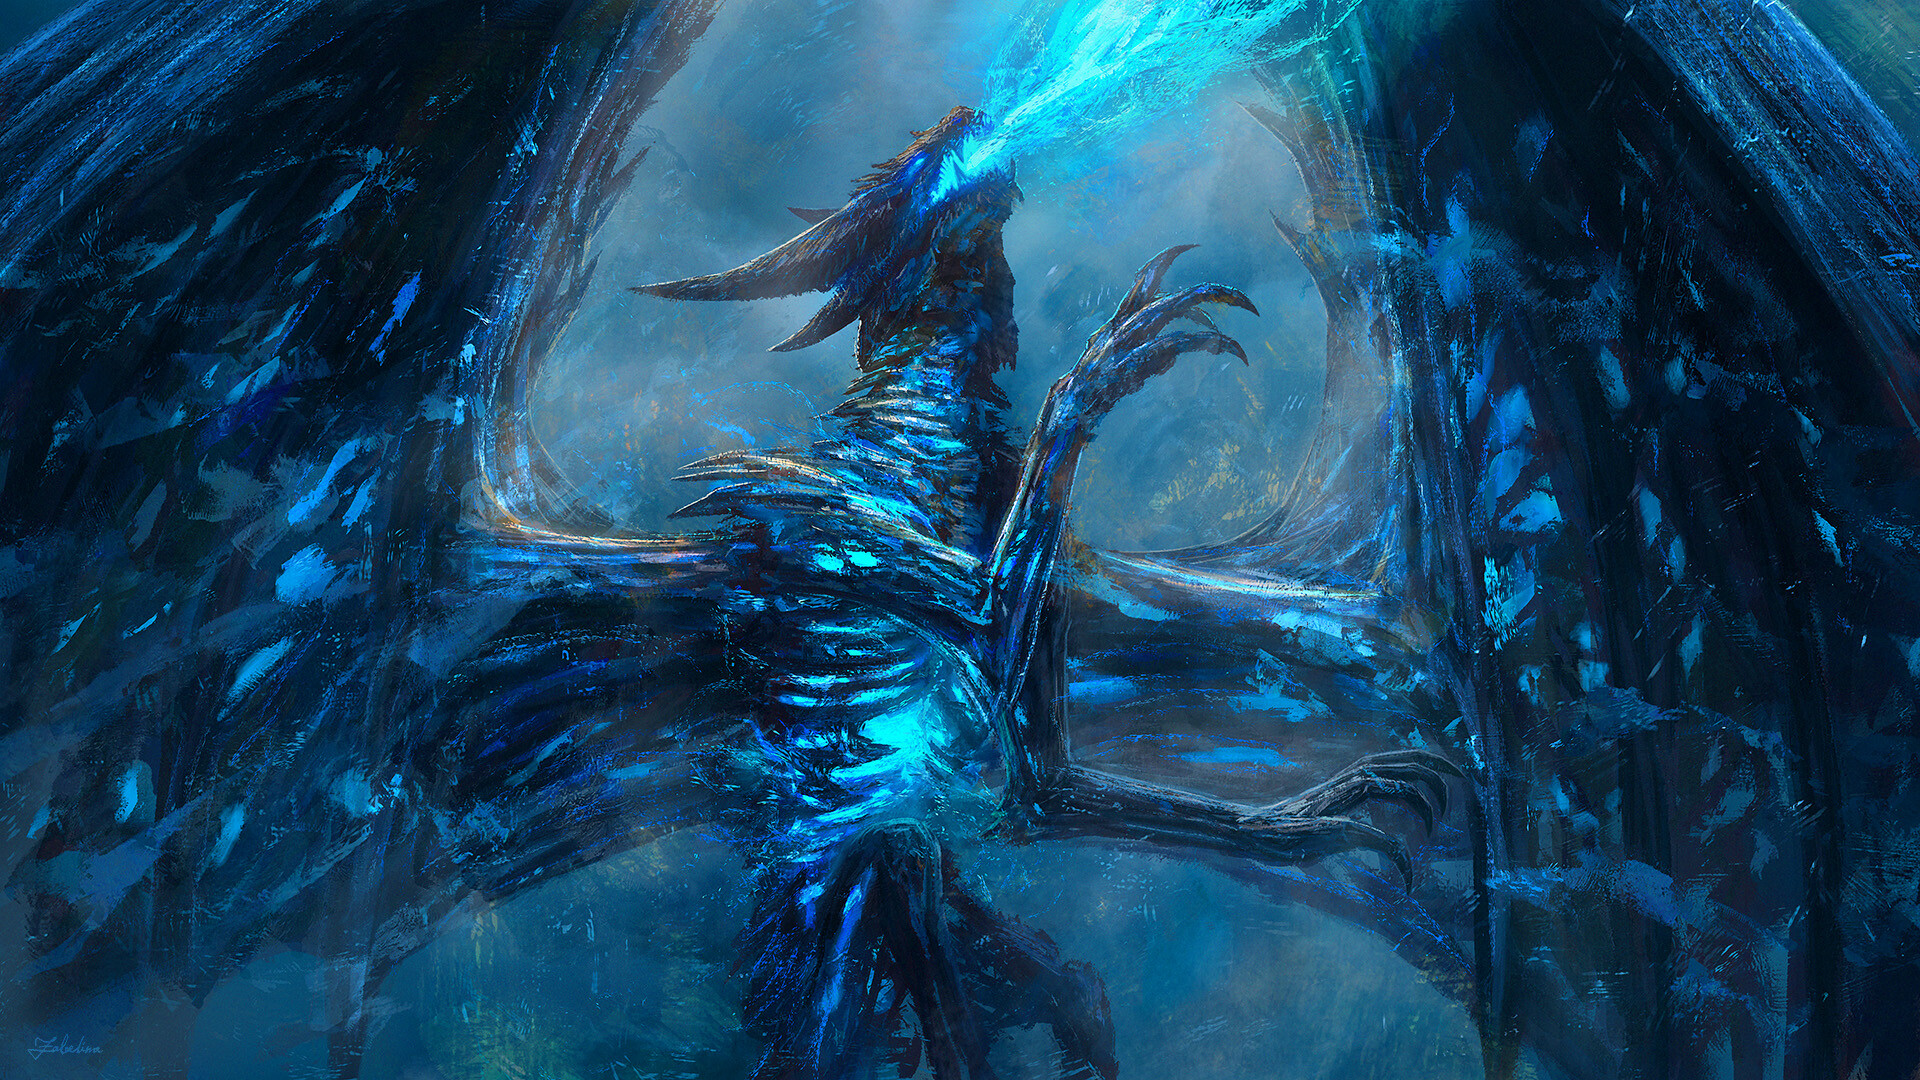 world of warcraft: wrath of the lich king, video game, sindragosa (world of warcraft), warcraft